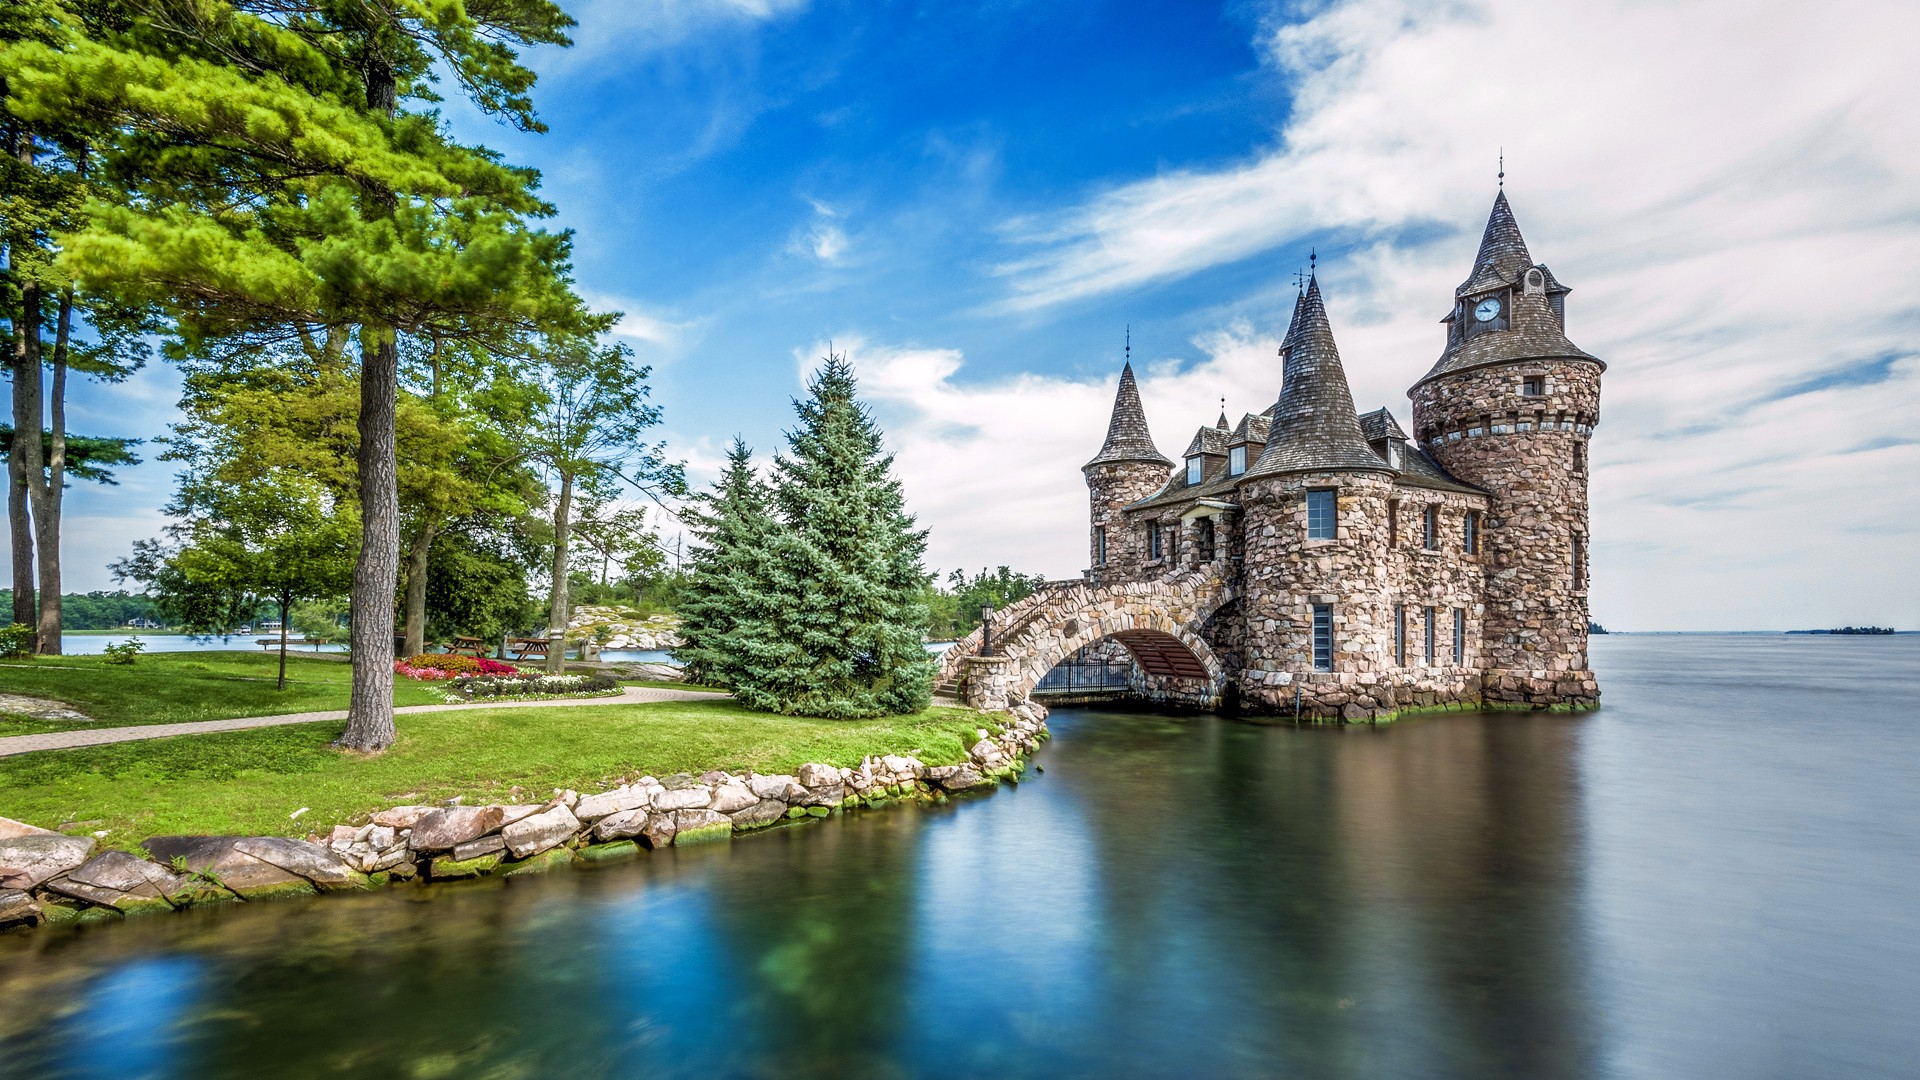 Architecture Castle Ancient Nature Trees Landscape Clouds New York State USA Water Lake Island Stone 1920x1080